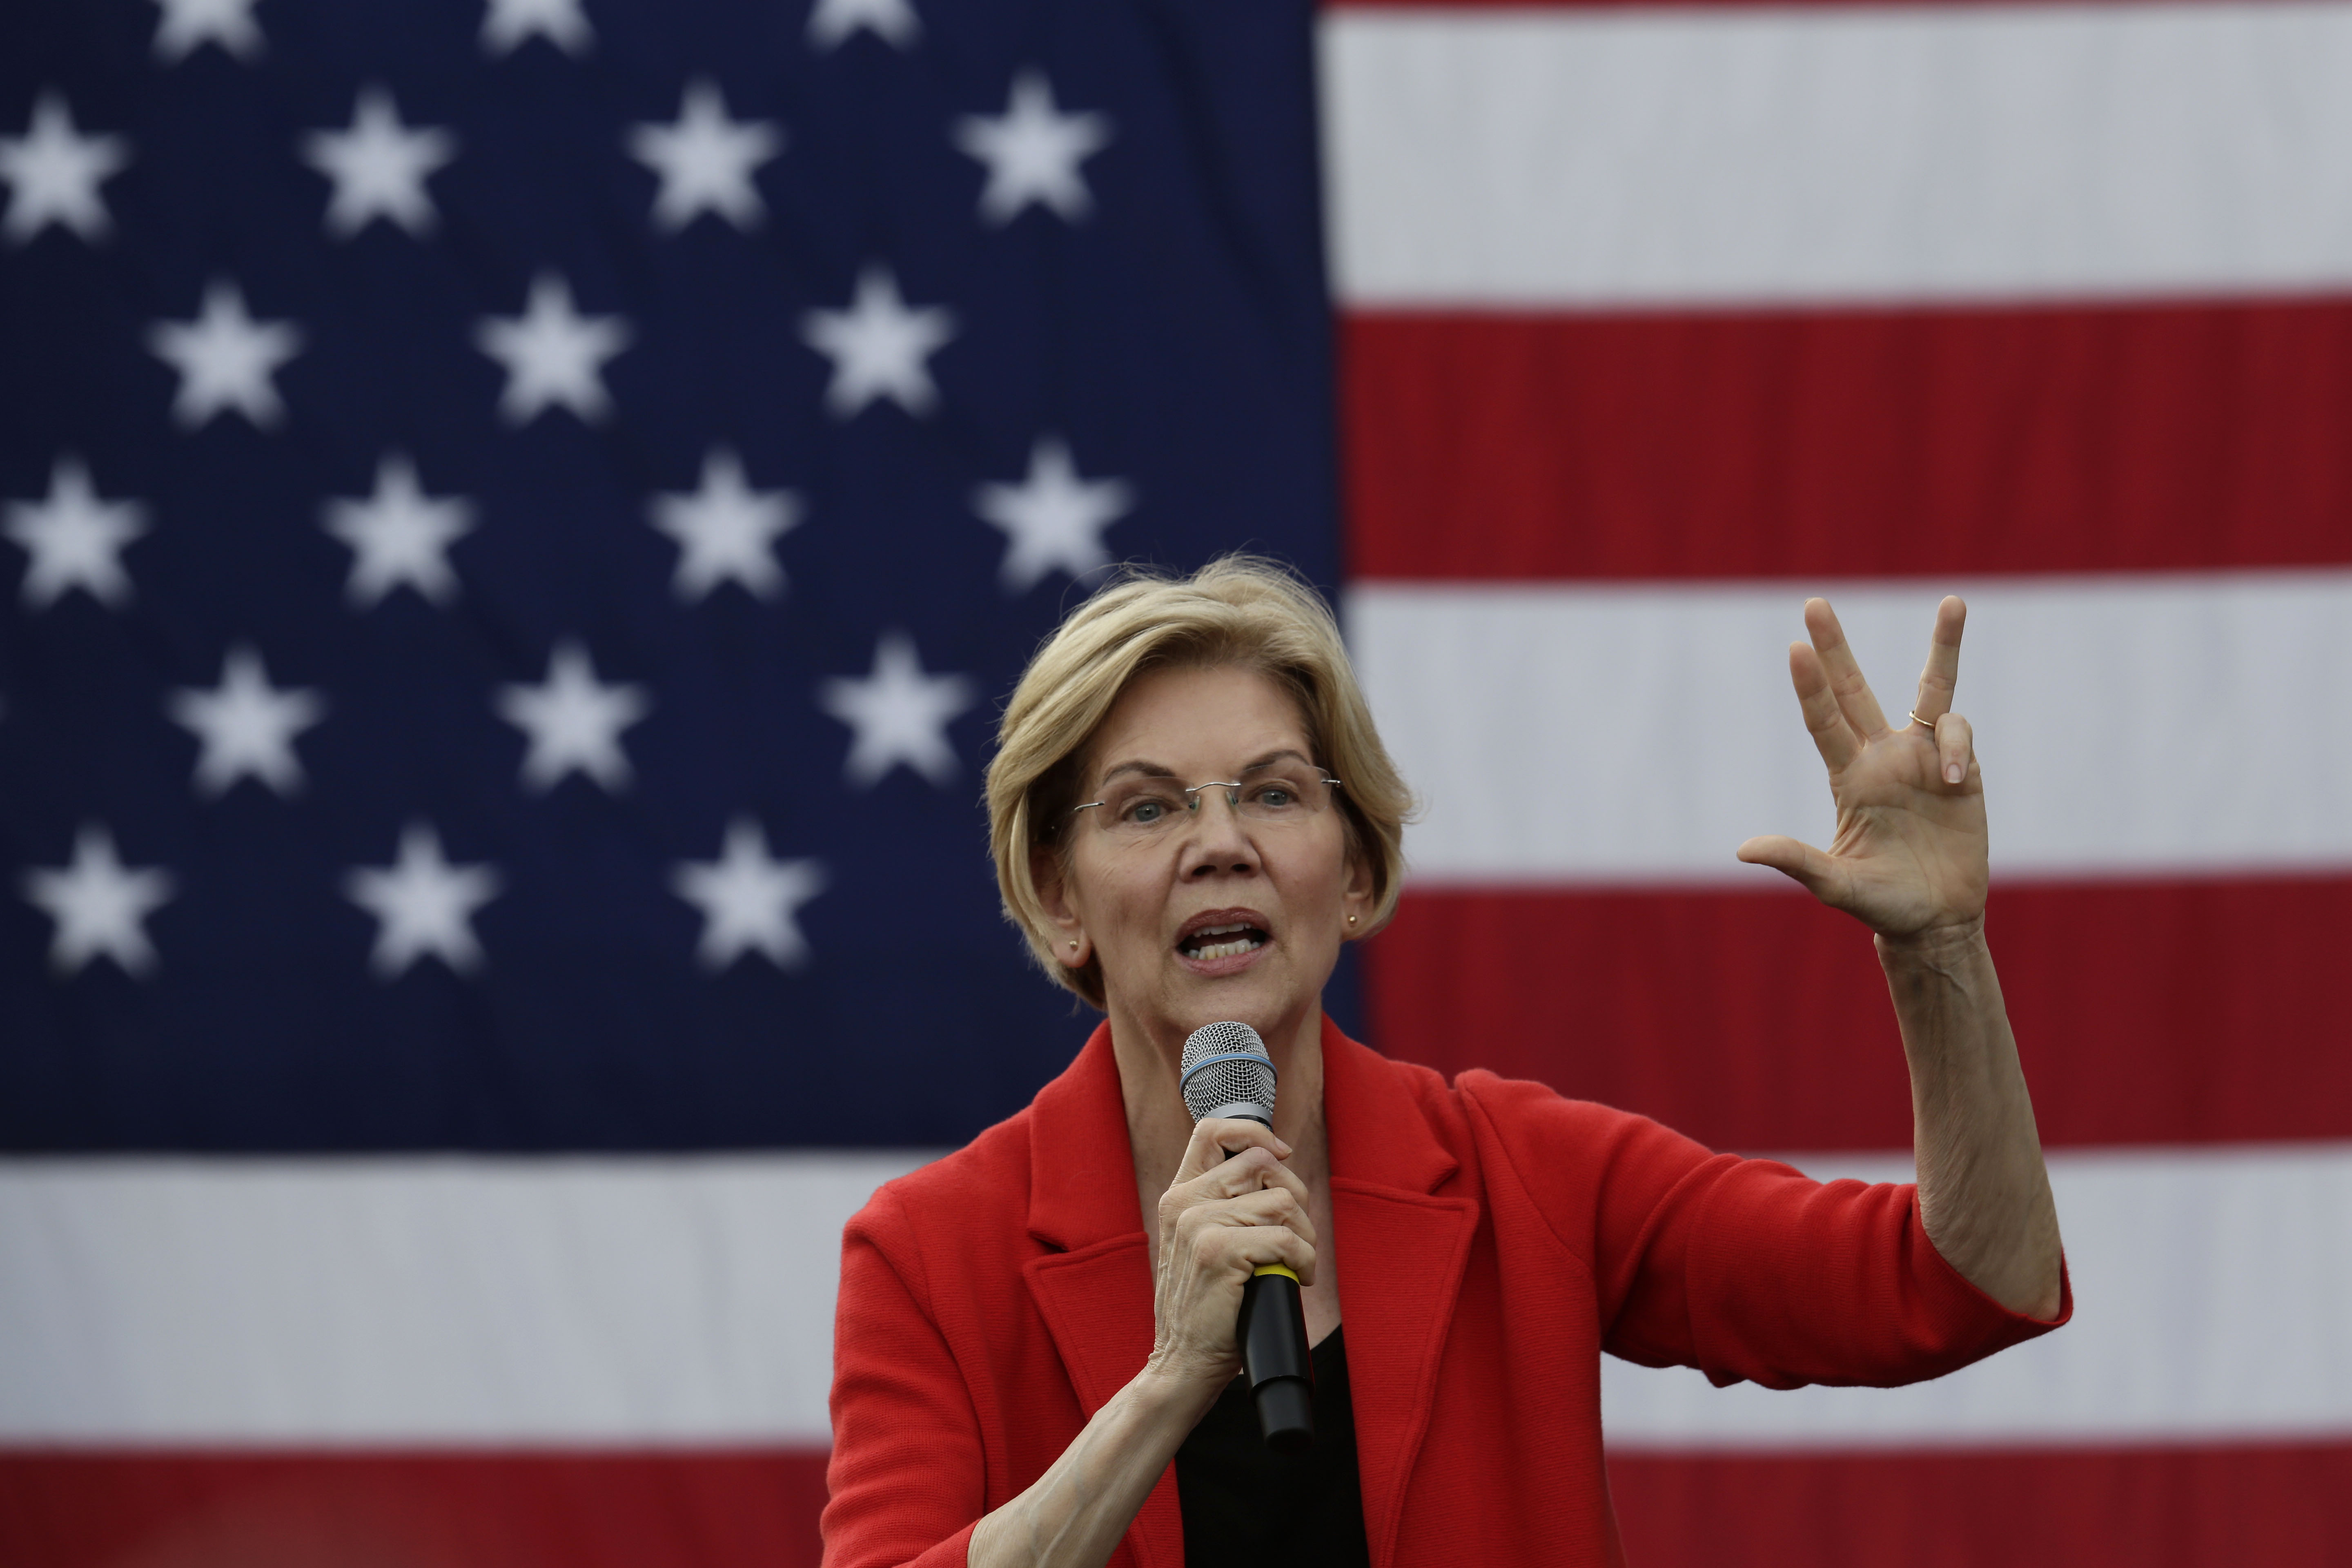 Democratic U.S. presidential hopeful Sen. Elizabeth Warren (D-MA) speaks during a campaign town hall at George Mason University May 16, 2019 in Fairfax, Virginia. (Alex Wong/Getty Images)